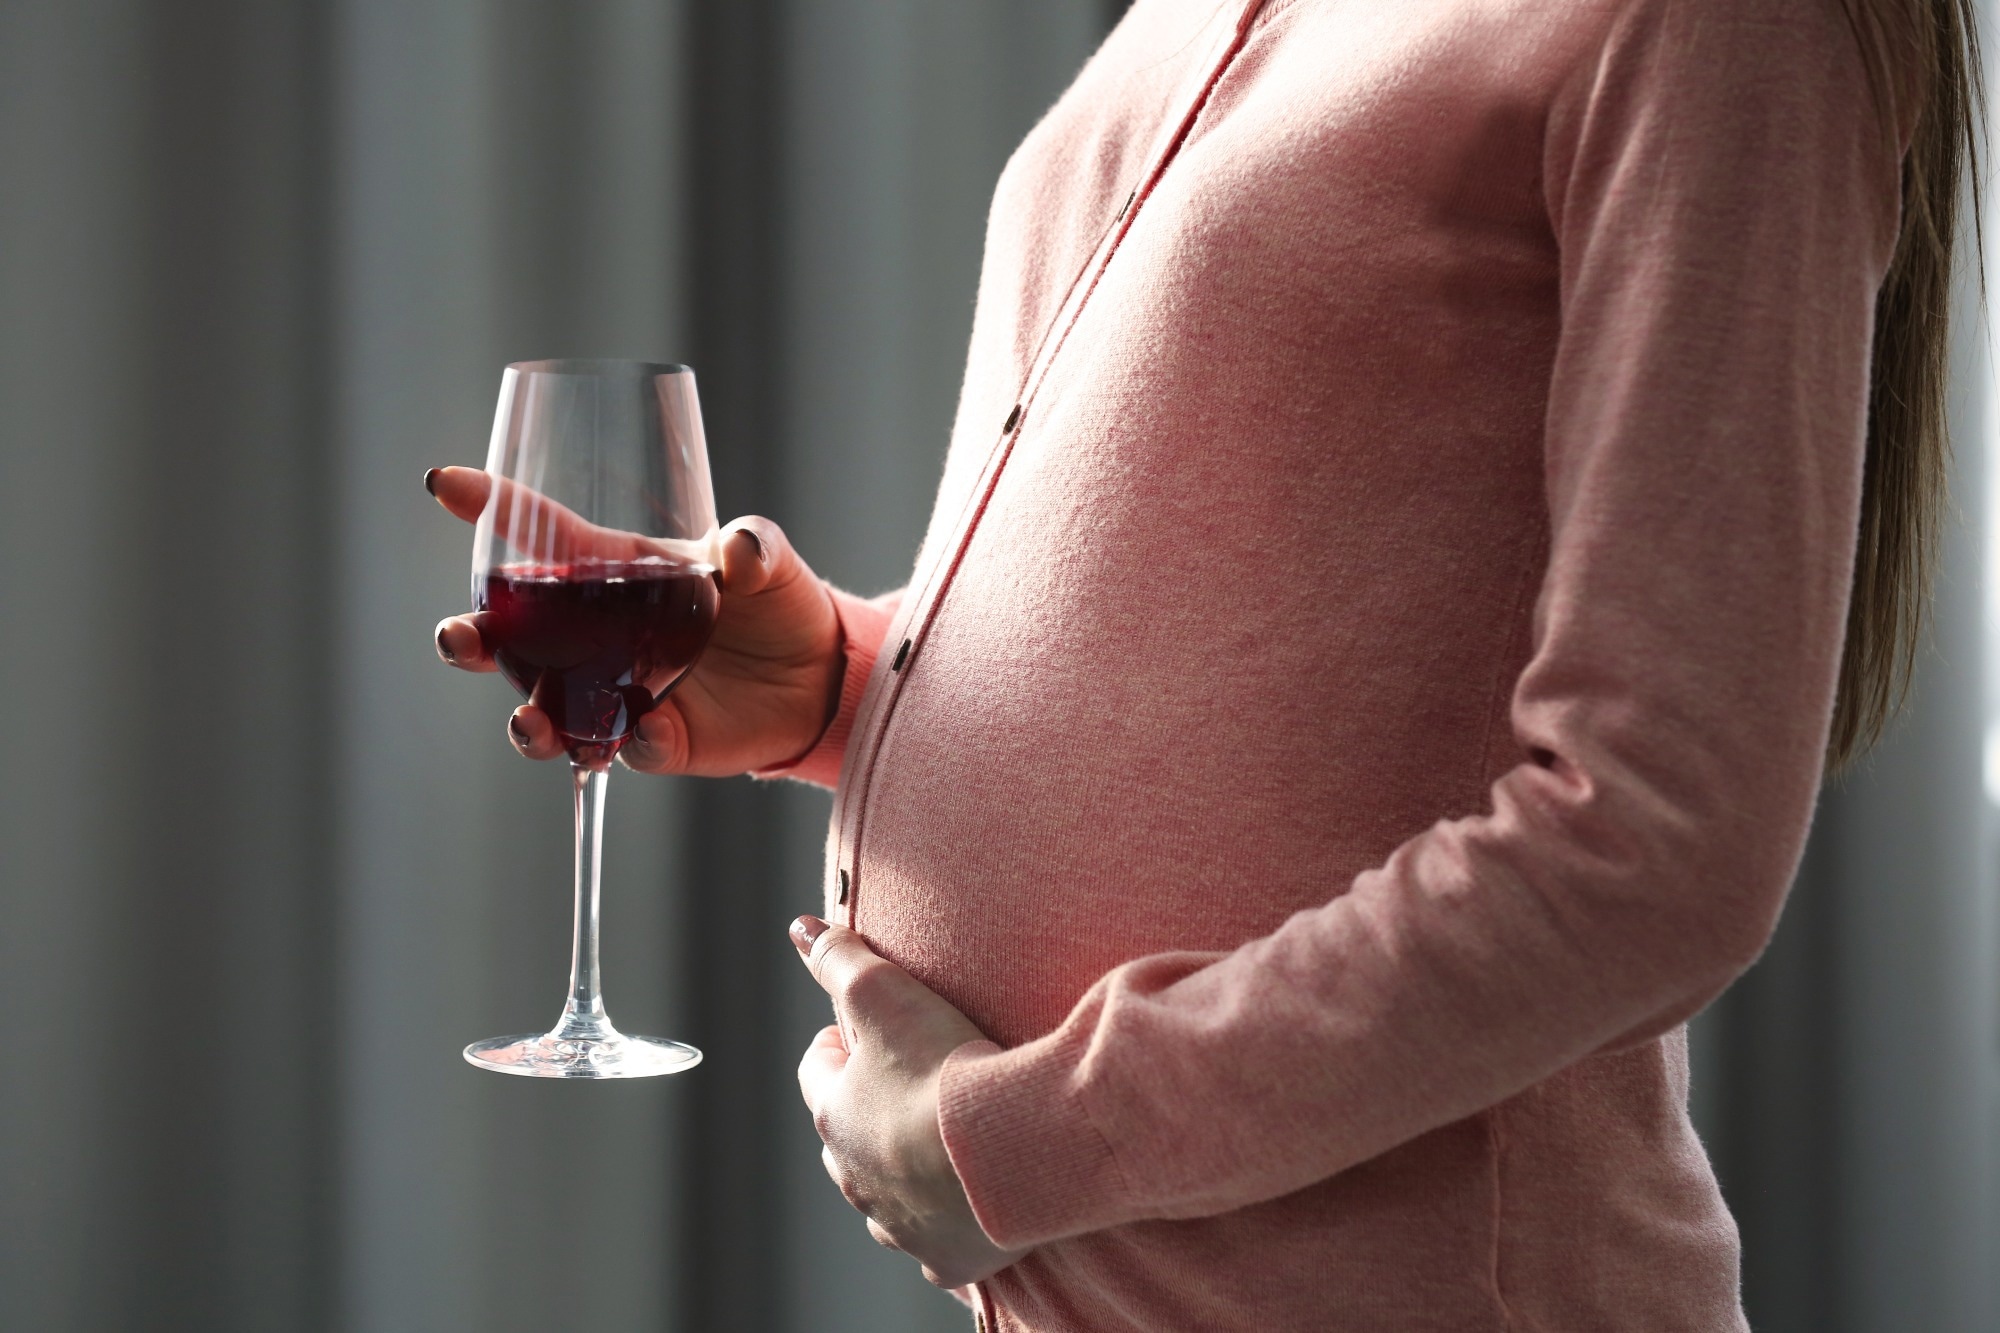 Study: Alcohol exposure before and during pregnancy is associated with reduced fetal growth: the Safe Passage Study. Image Credit: AfricaStudio/Shutterstock.com